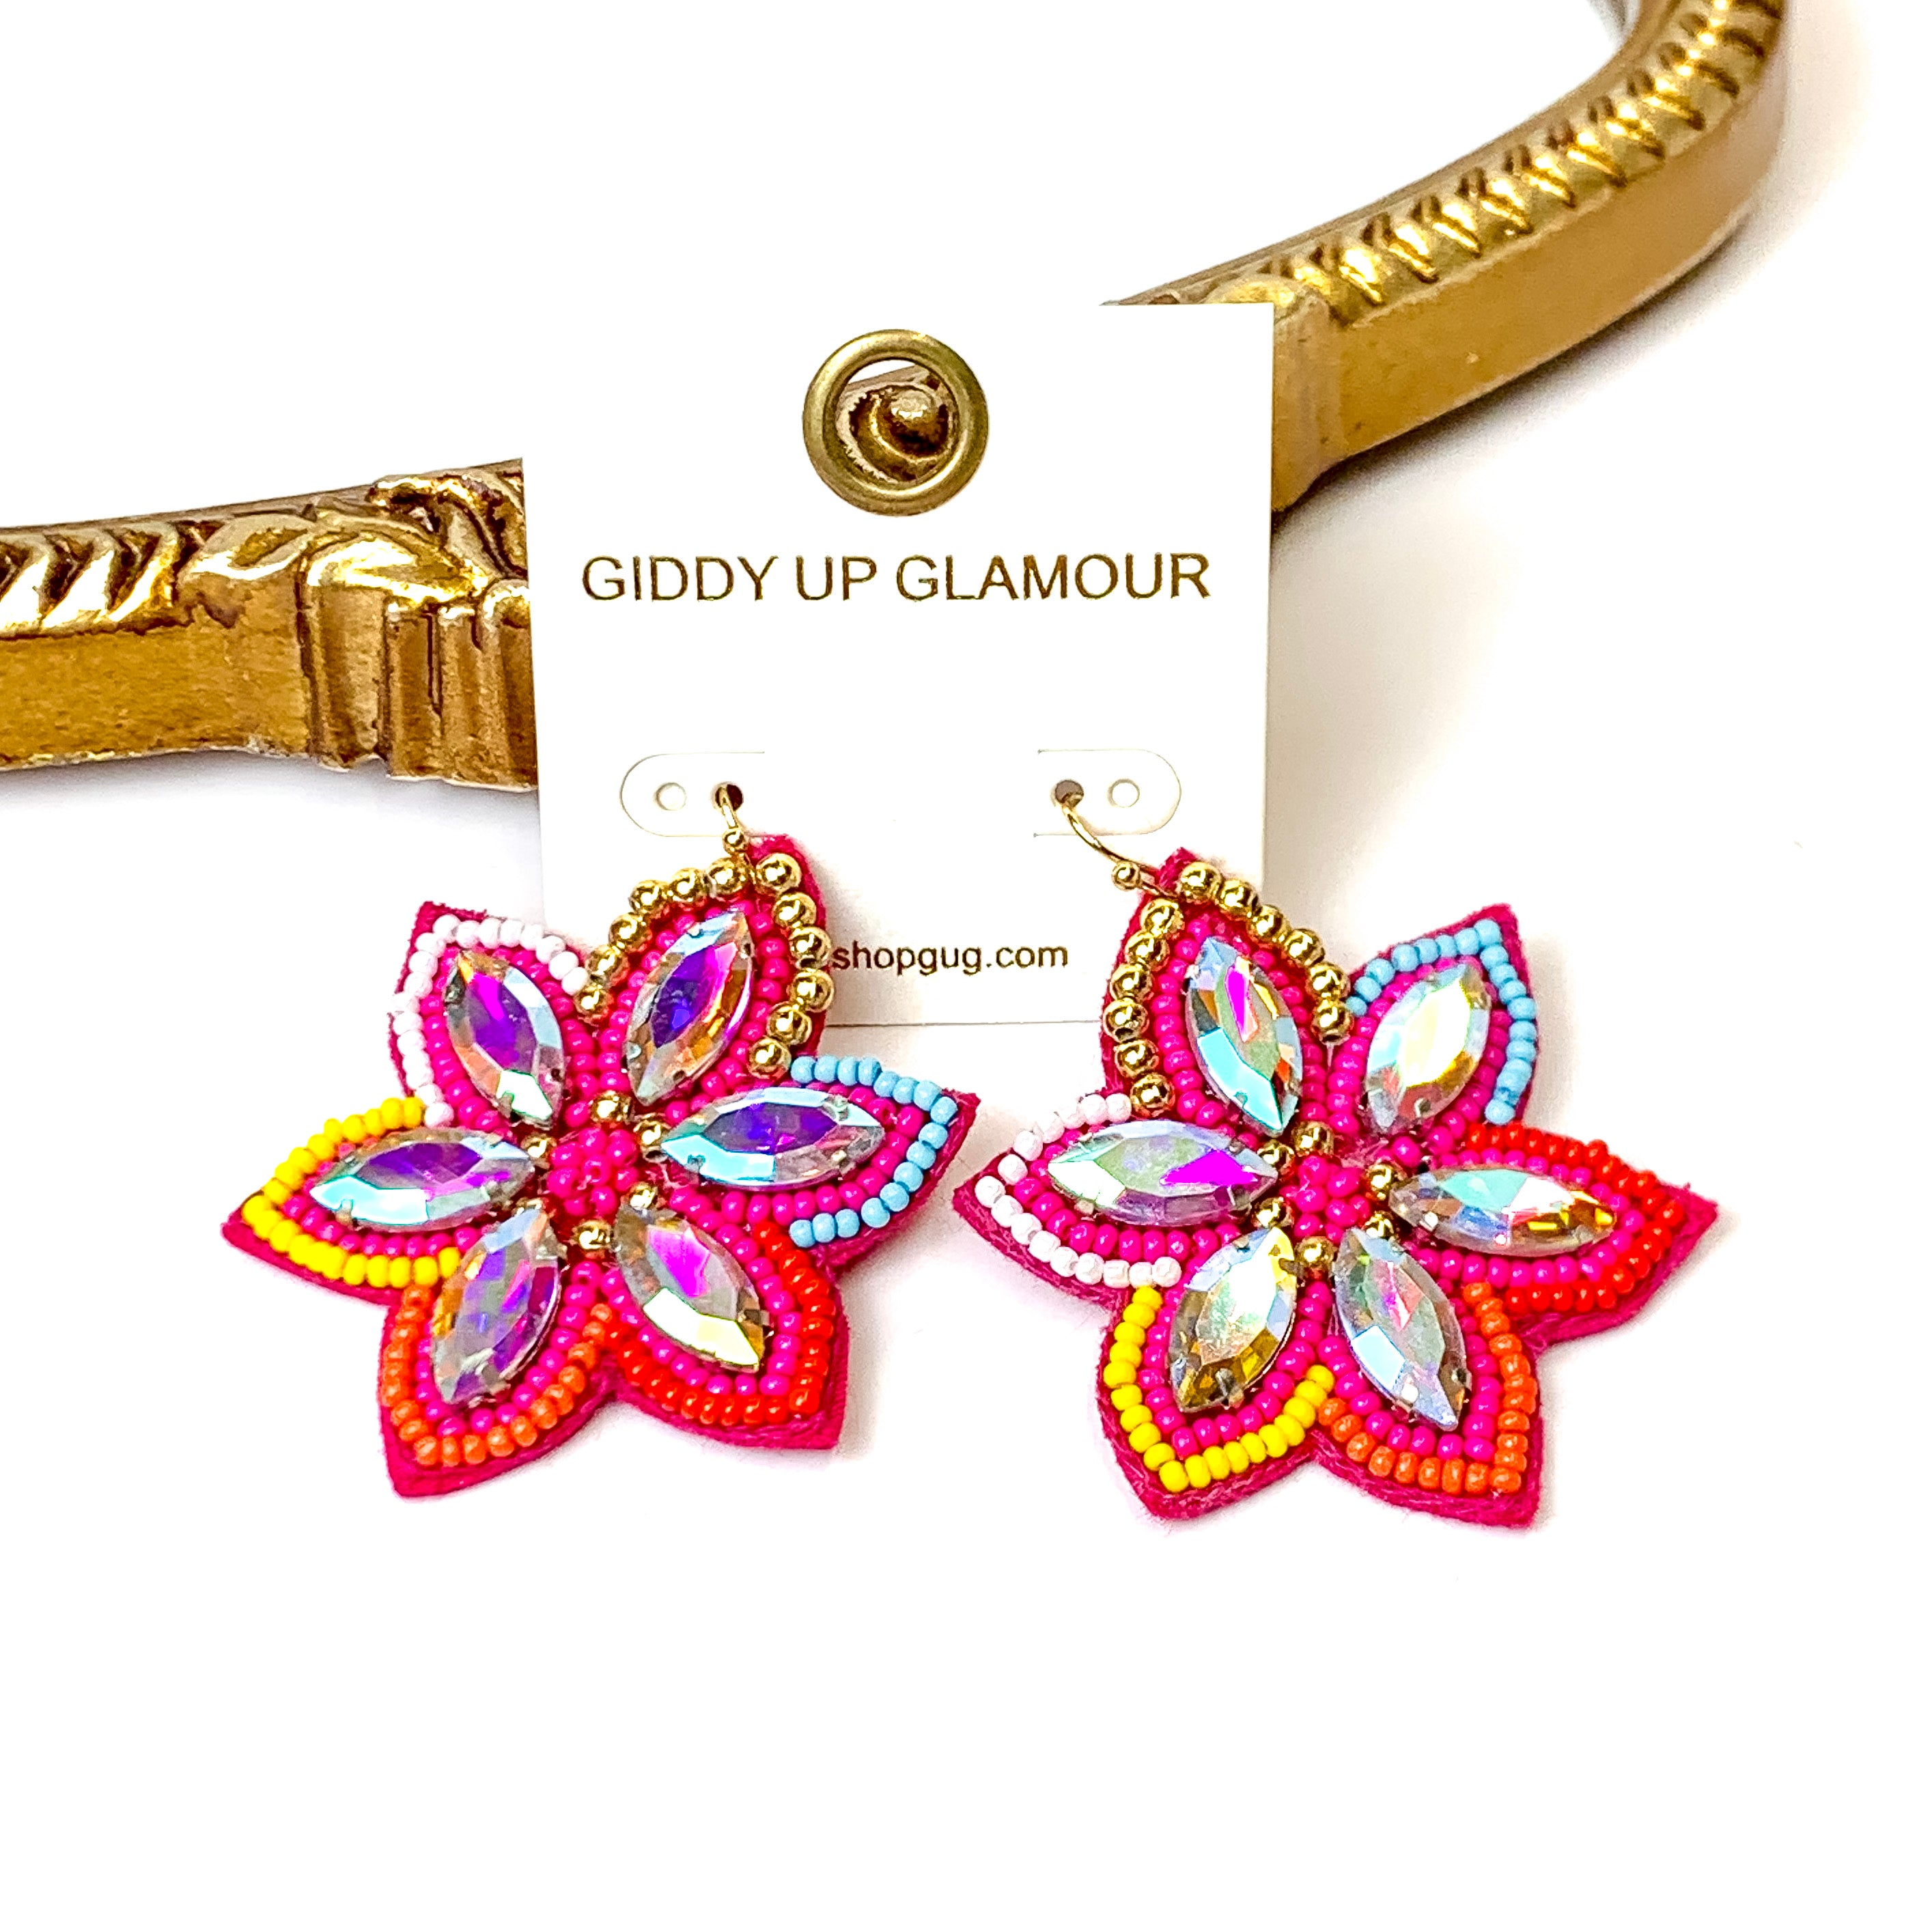 Desert Daisy Multicolored Flower Shaped Earrings with AB Crystal Accents in Fuchsia Pink - Giddy Up Glamour Boutique